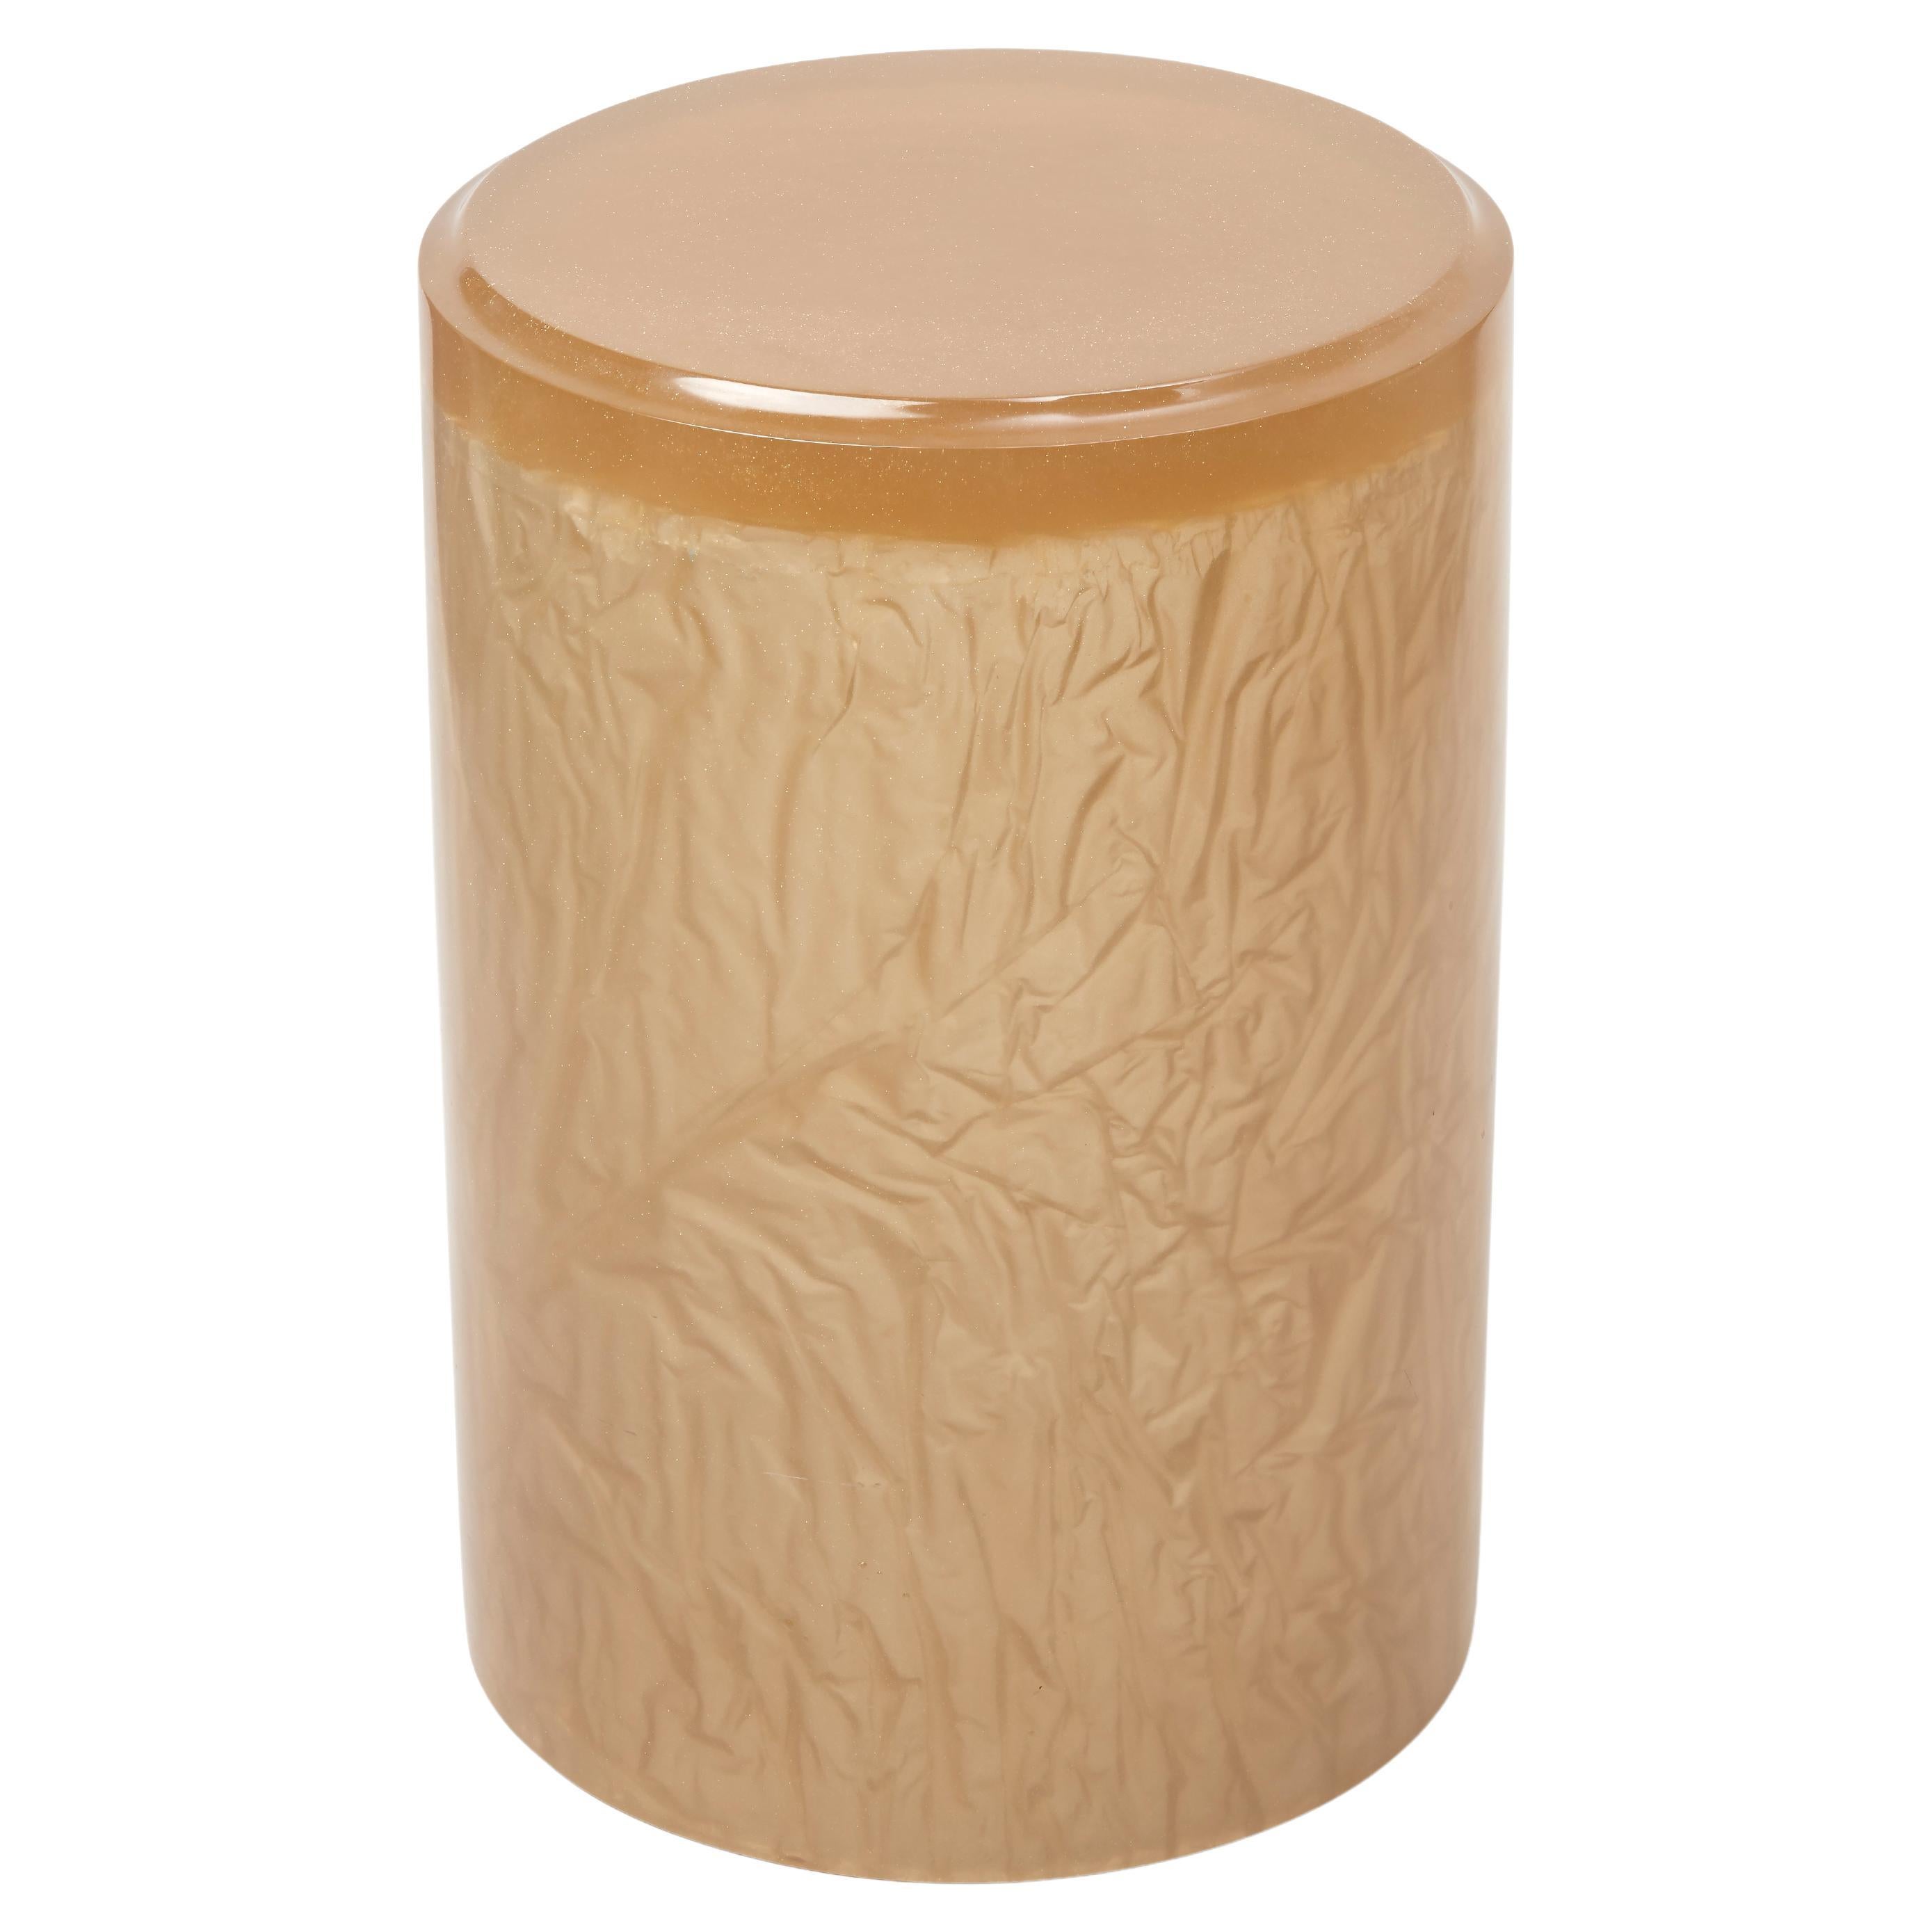 Contemporary Resin Acrylic Side Table or Stool by Natalie Tredgett, gloss, Gold